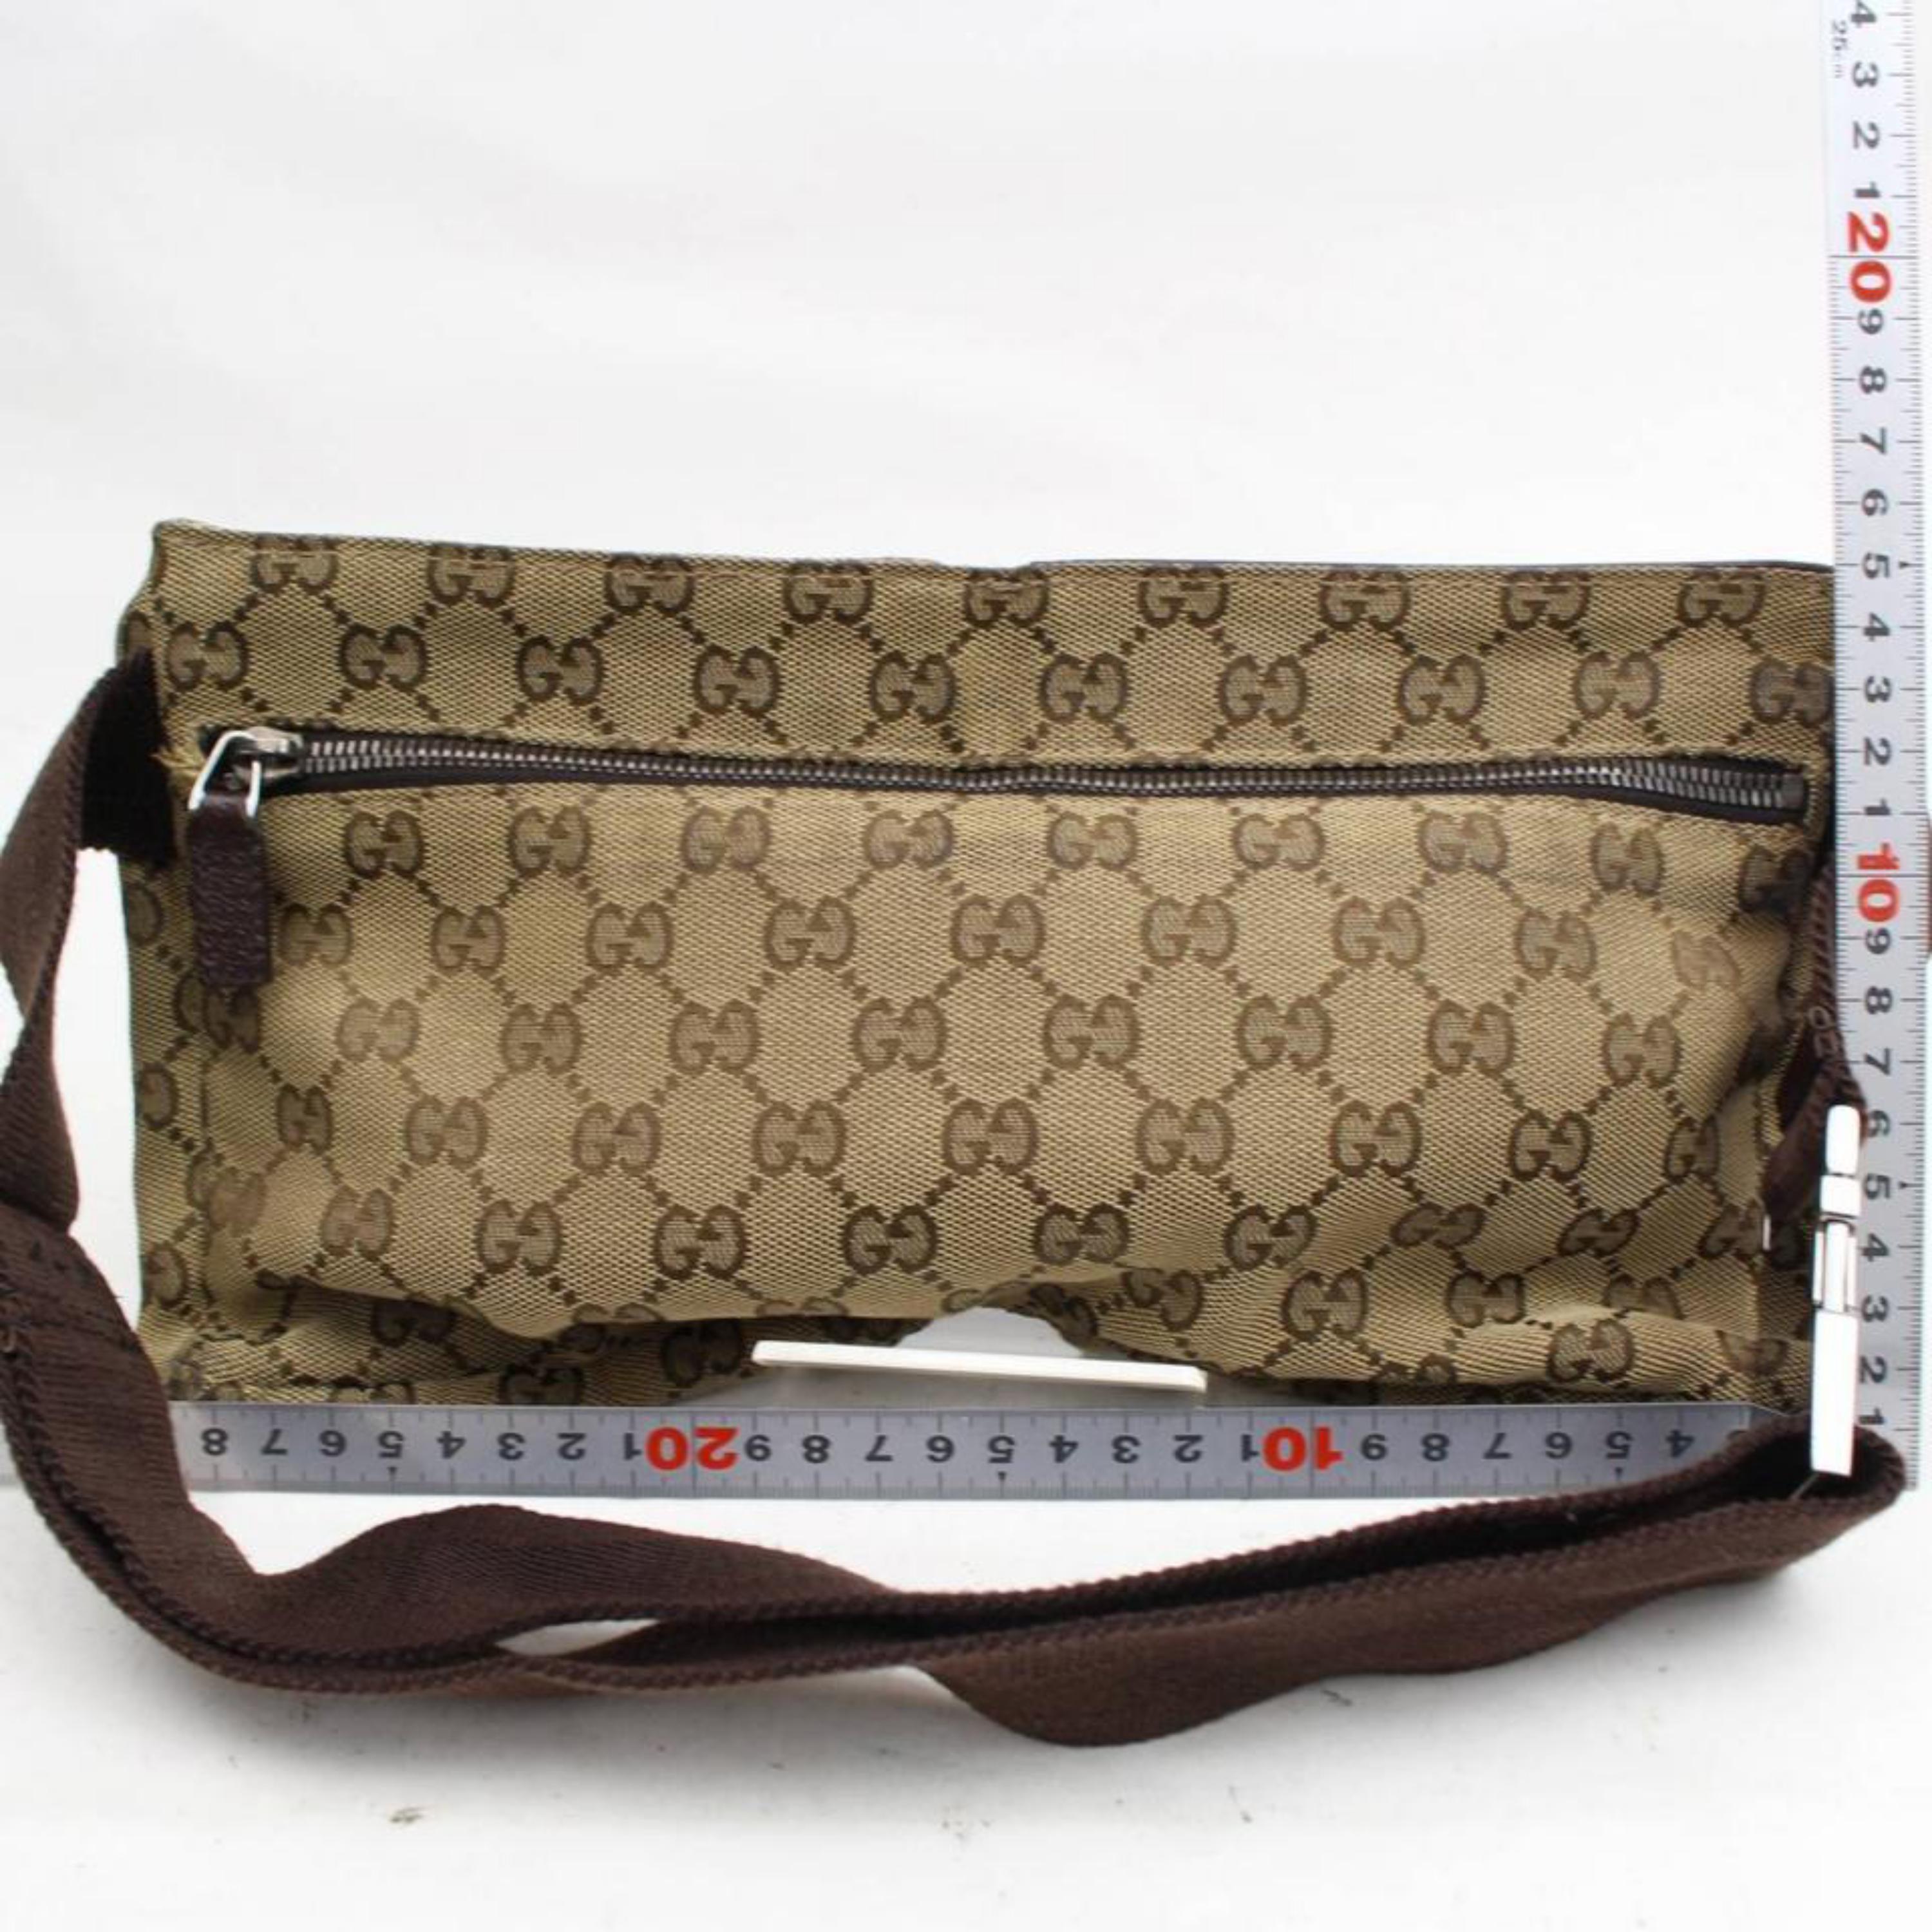 Gucci Monogram Gg Waist Pouch Fanny Pack 868298 Brown Canvas Cross Body Bag For Sale 1